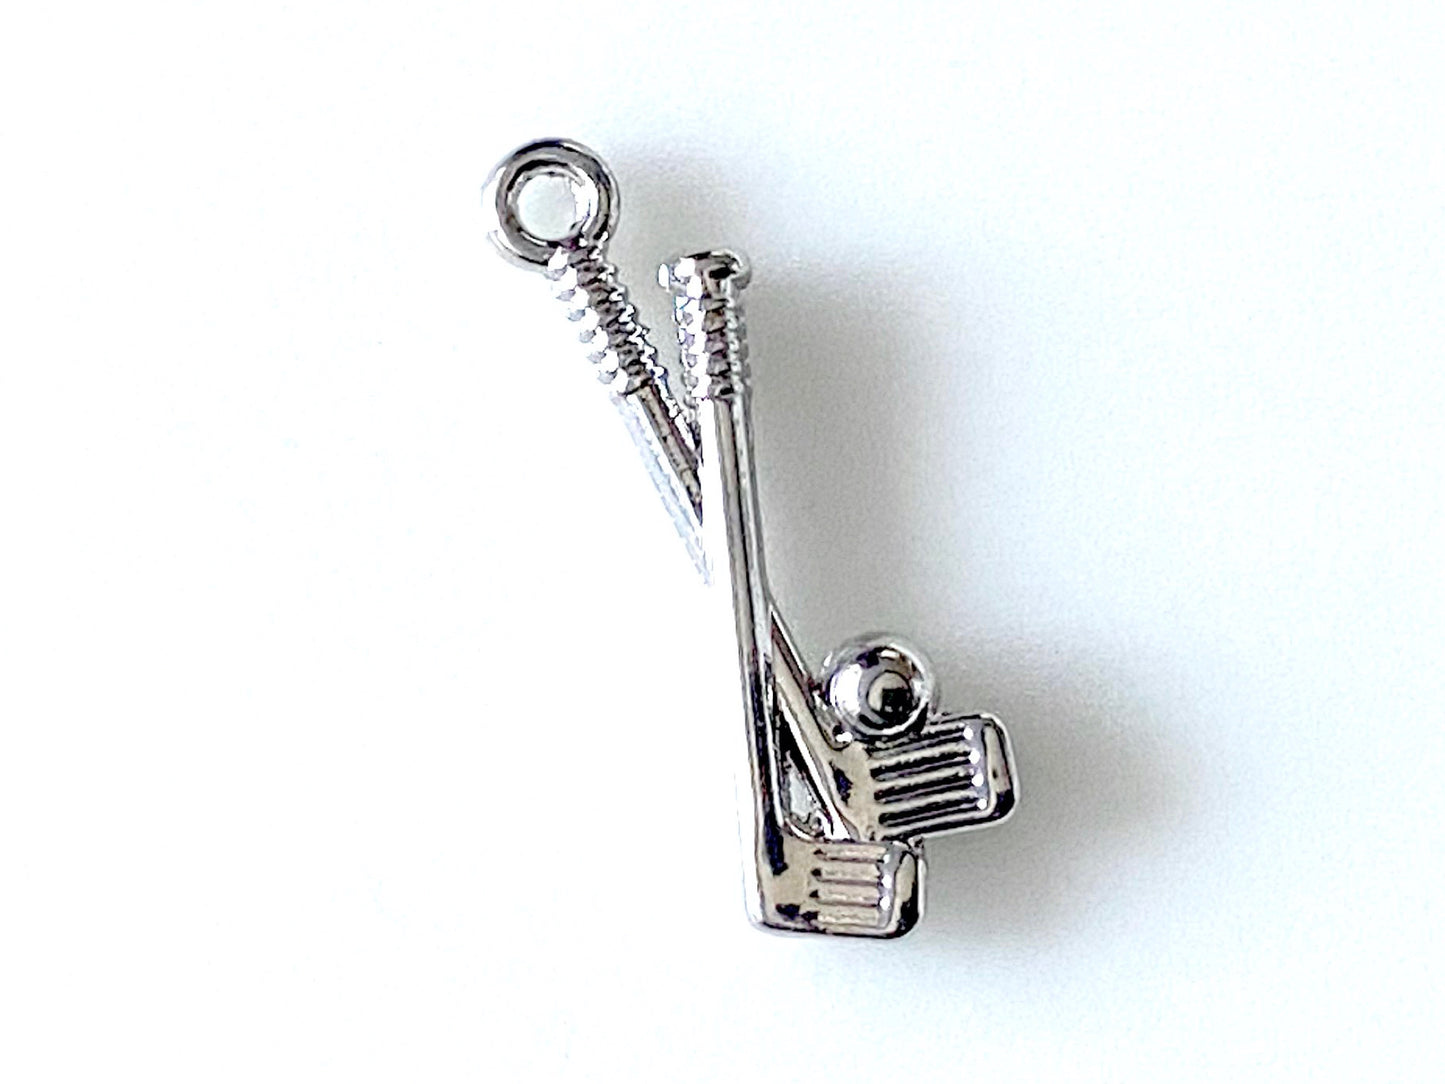 Jewelry Bar | Golf Clubs Pewter Charm